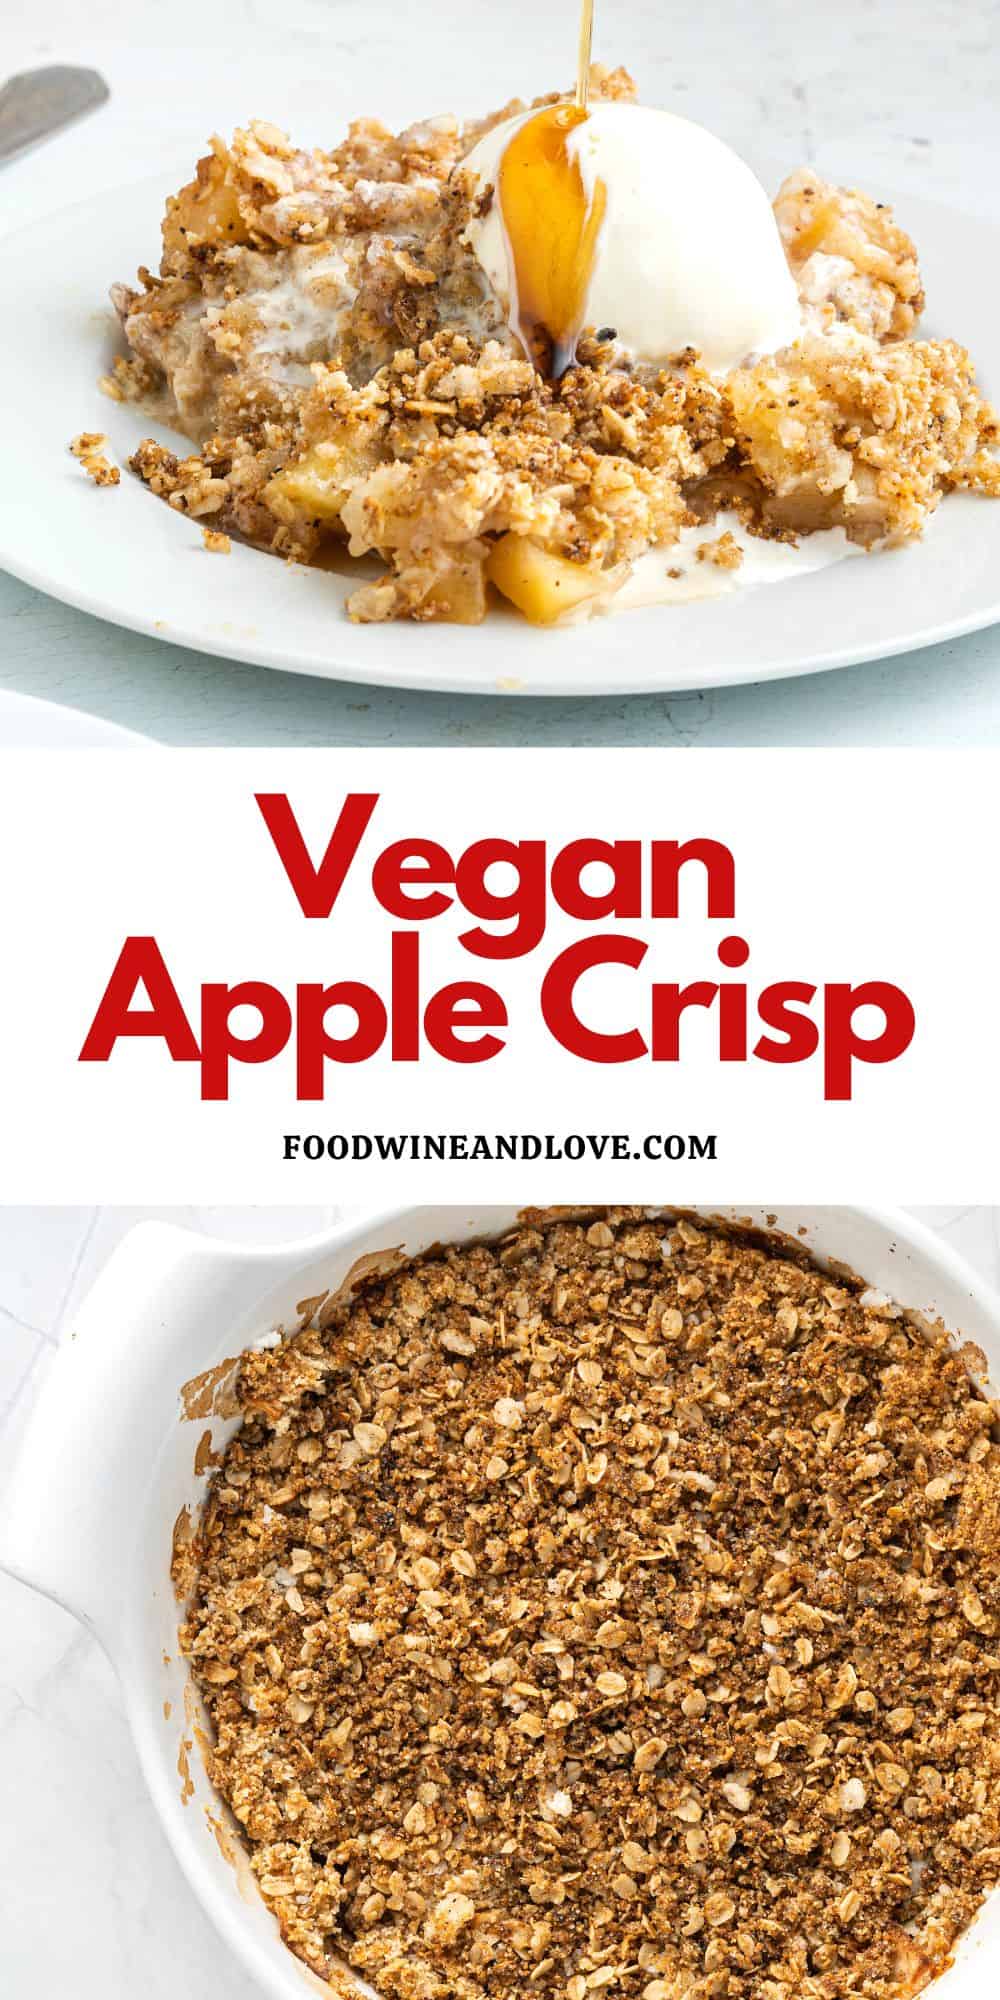 Vegan Apple Crisp Recipe, a simple recipe for making a delicious vegan fall dessert featuring fresh apples with a streusel topping.